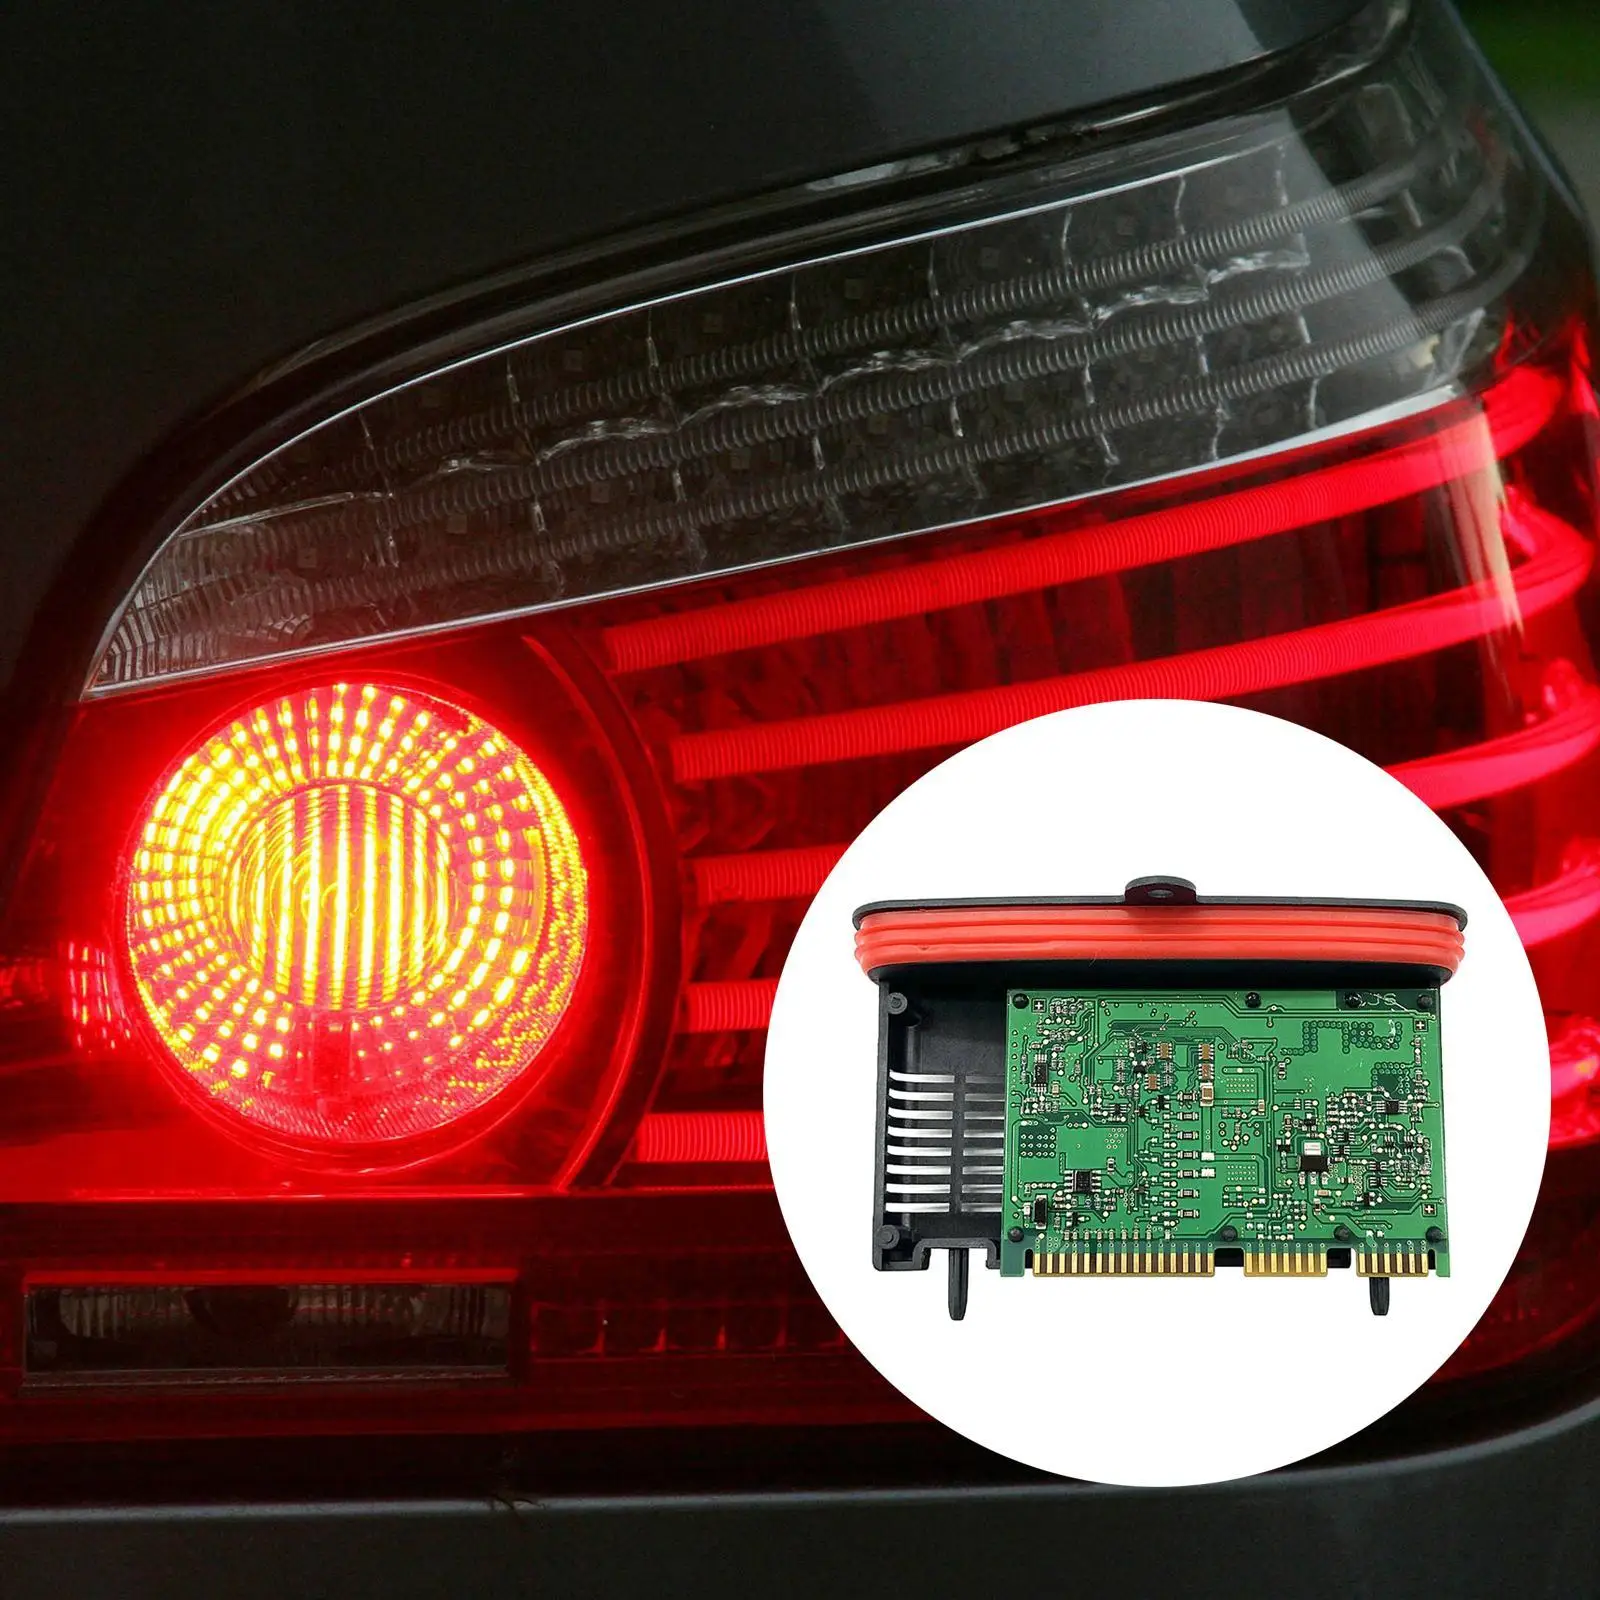 LED Headlight Driver Module Replacement for BMW 5 Series F82 F10 F11 F33 F18, Material: high quality ABS & Metal finish